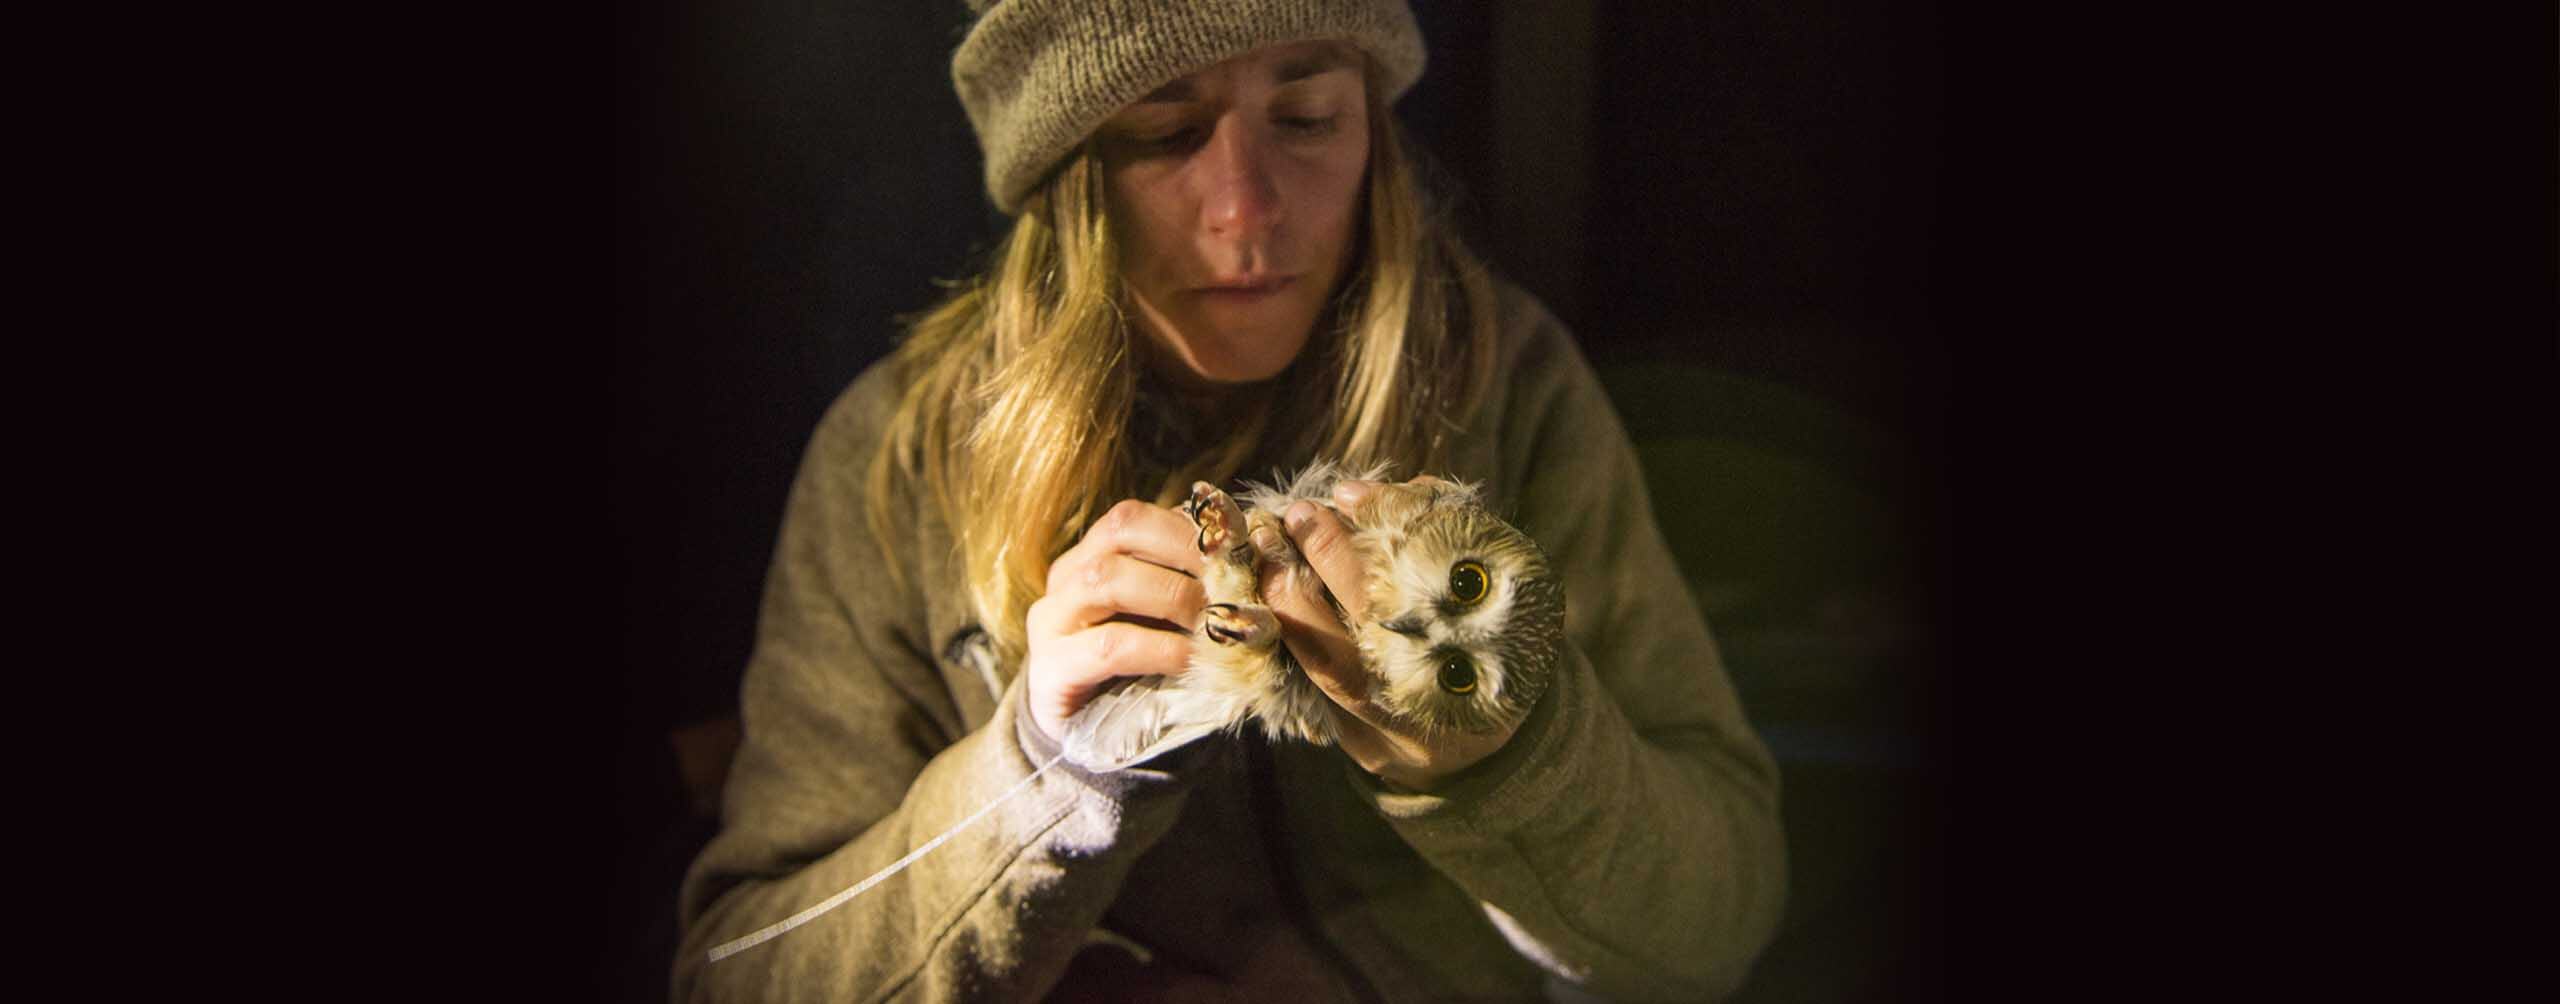 A photo of a woman holding a small owl at night